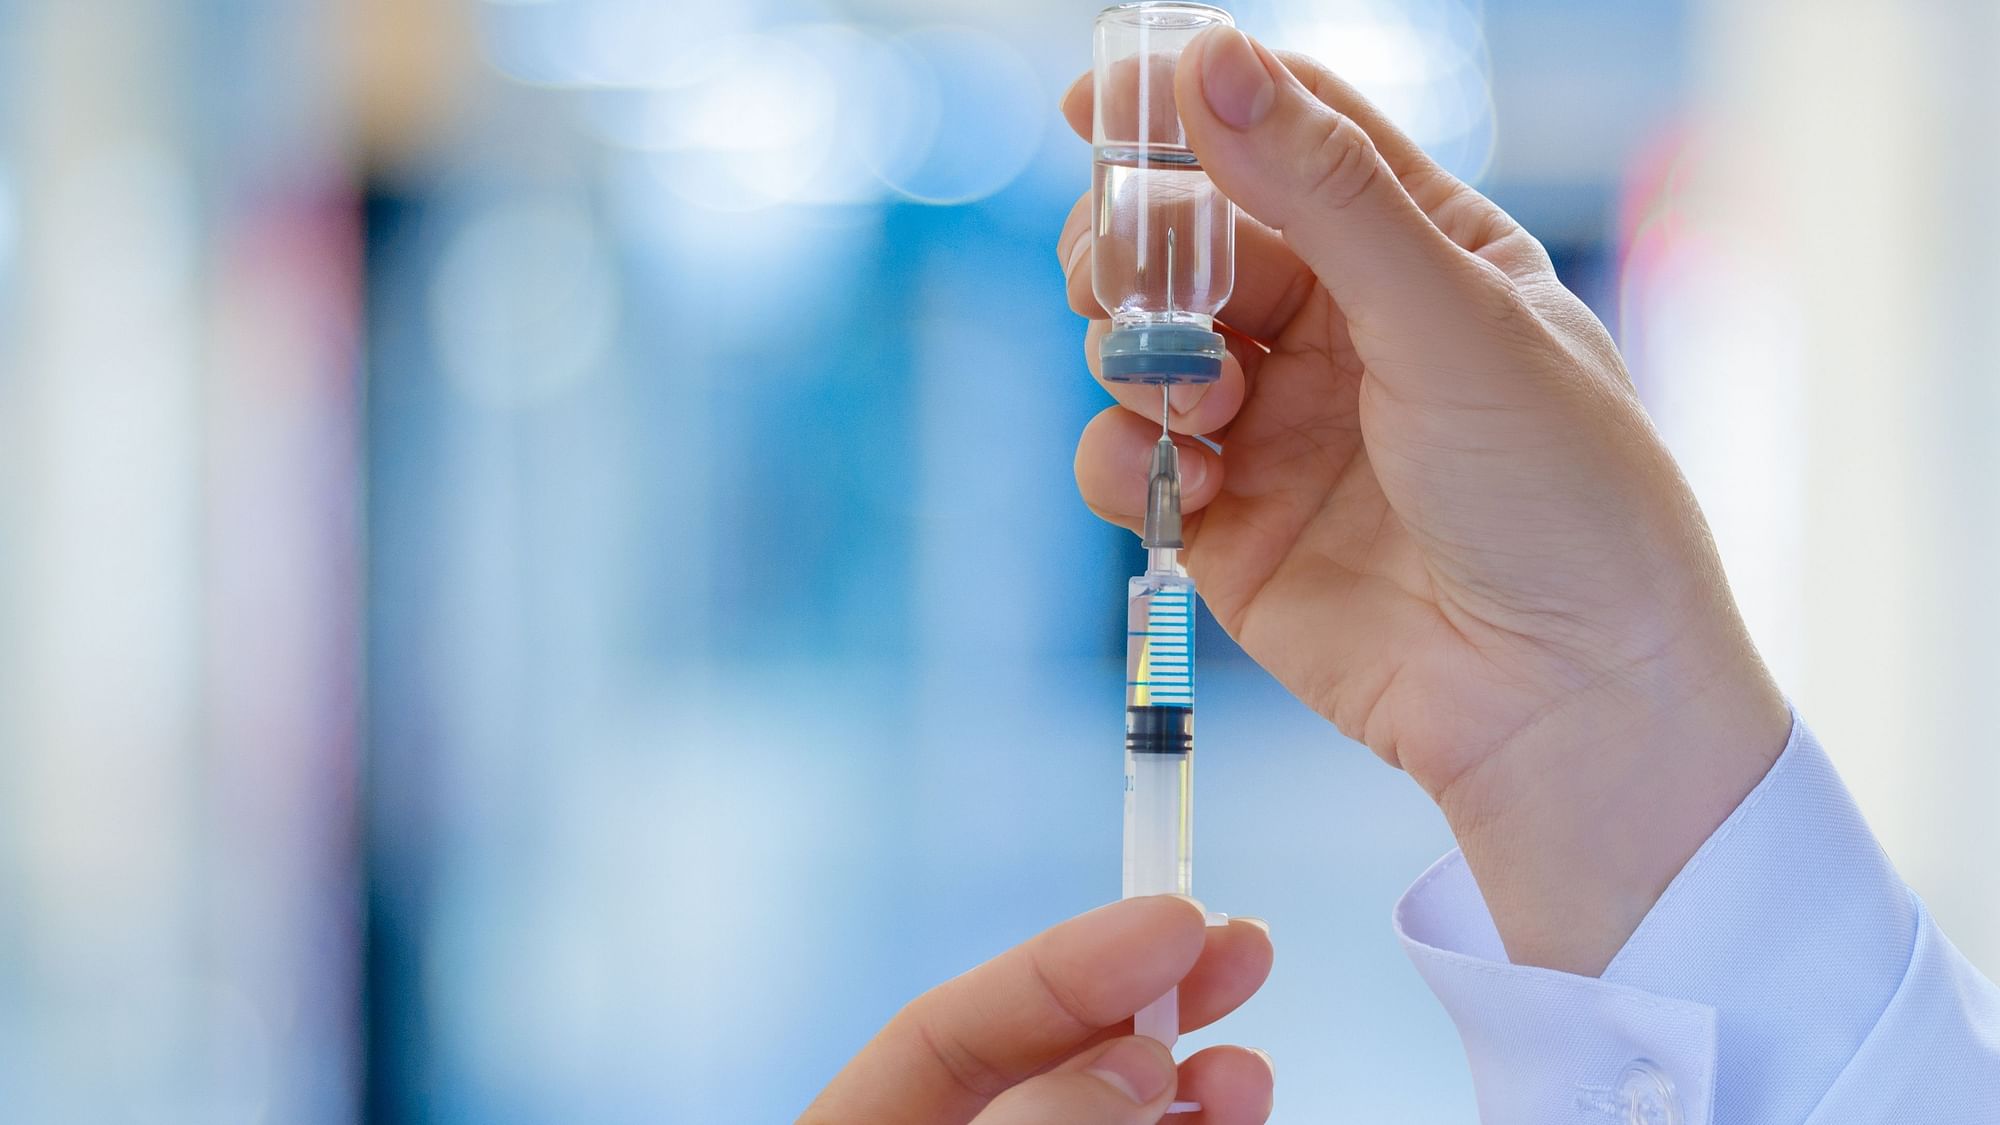 Bahrain became the second country after UK to approve a COVID 19 vaccine.